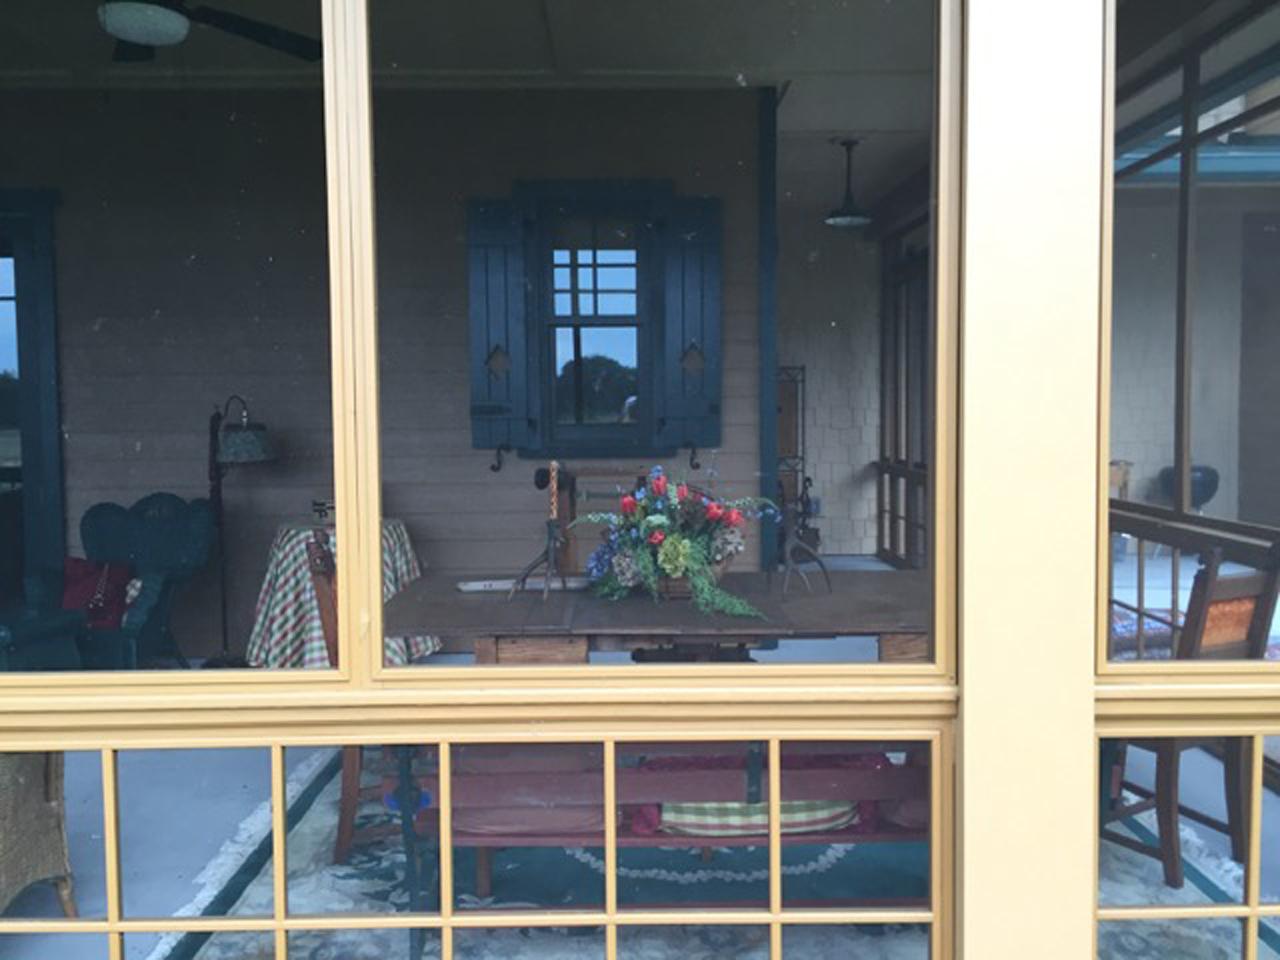 View through screen porch of board and batten operable shutters